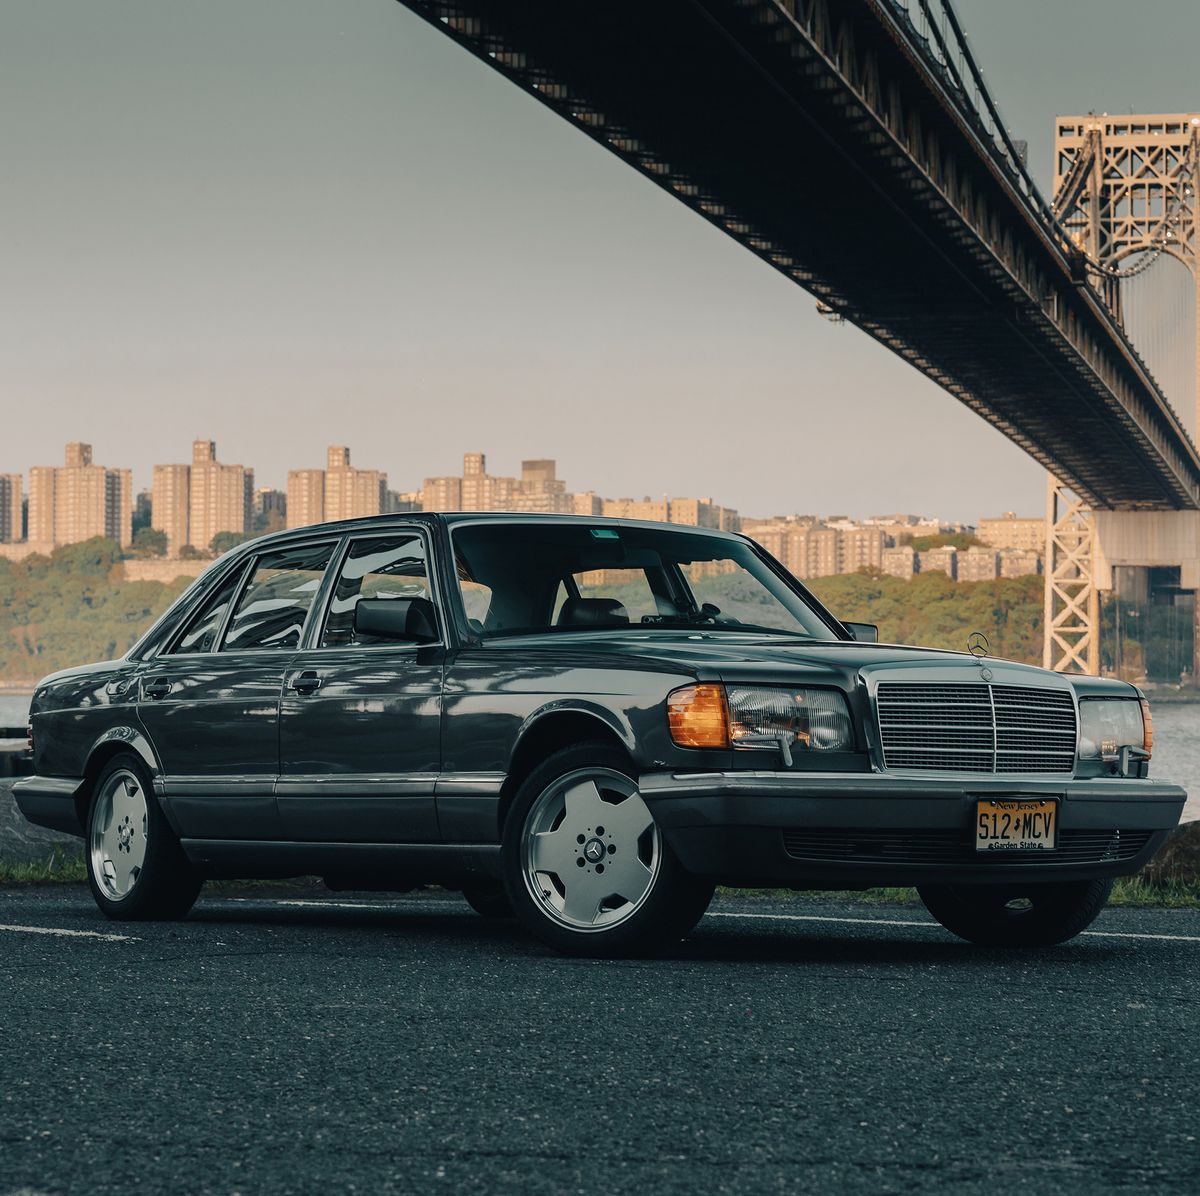 The Mercedes-Benz W126 S-Class Is a Classic Car to Drive Every Day